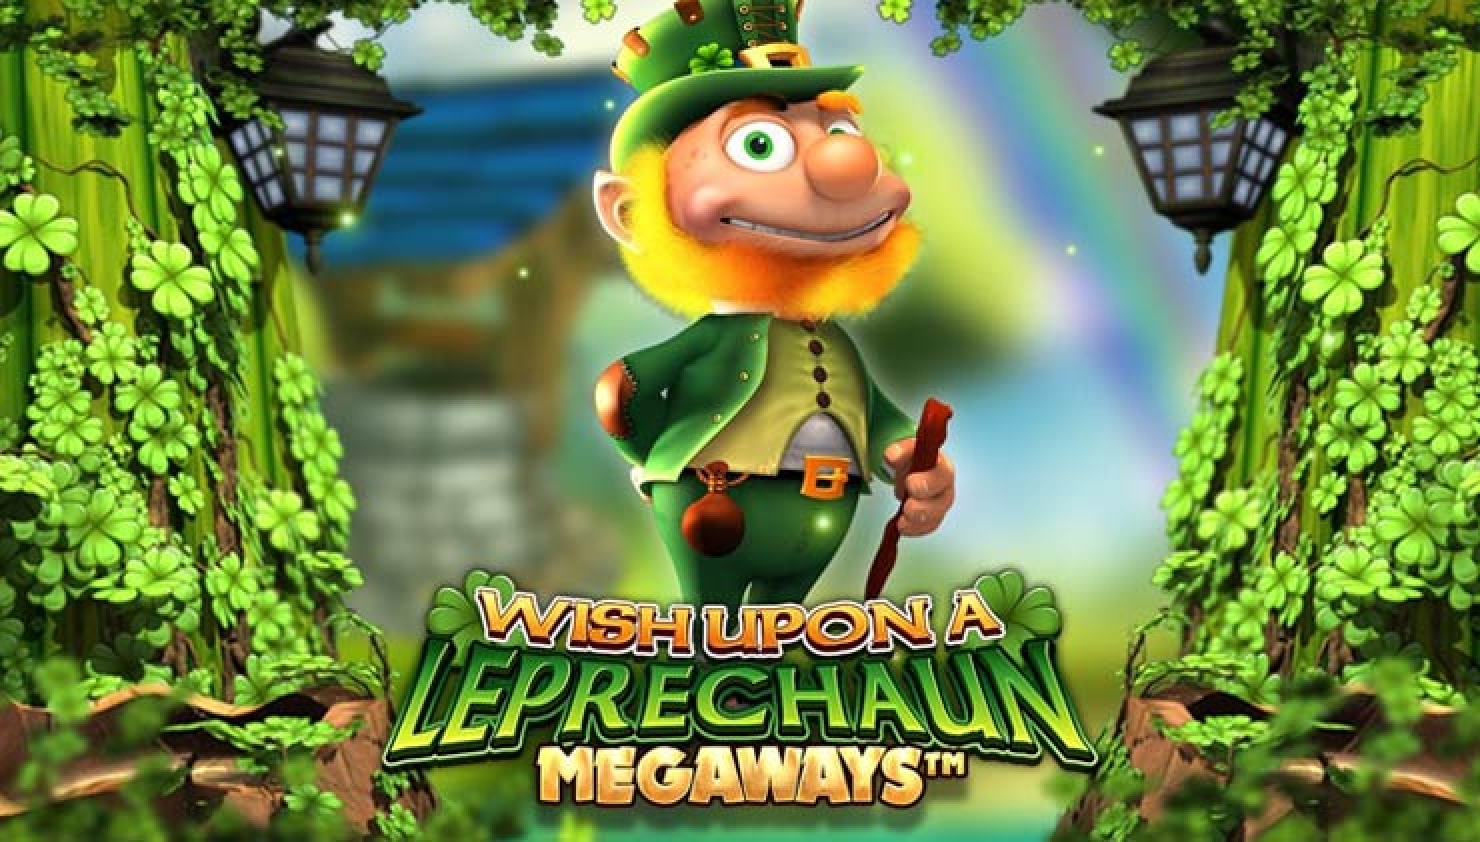 The Wish Upon A Leprechaun Megaways Online Slot Demo Game by Blueprint Gaming